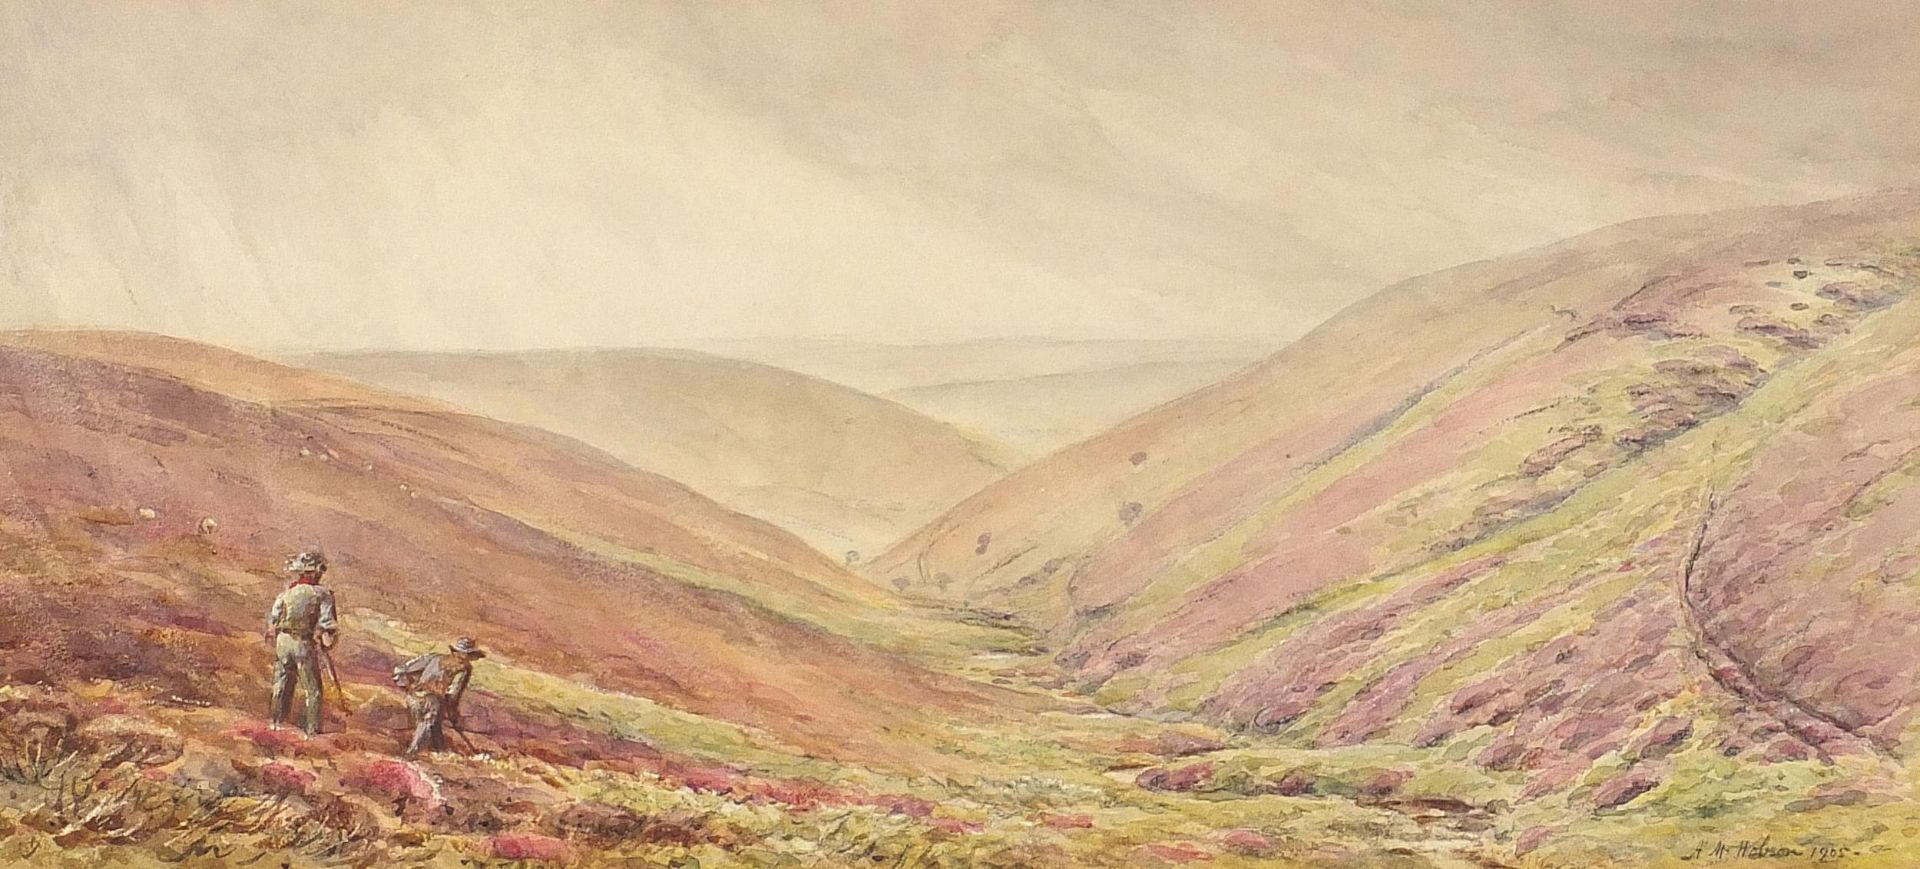 Alice Mary Hobson - Lark Coombe, Exmoor, early 20th watercolour, unframed, 39cm x 19cm